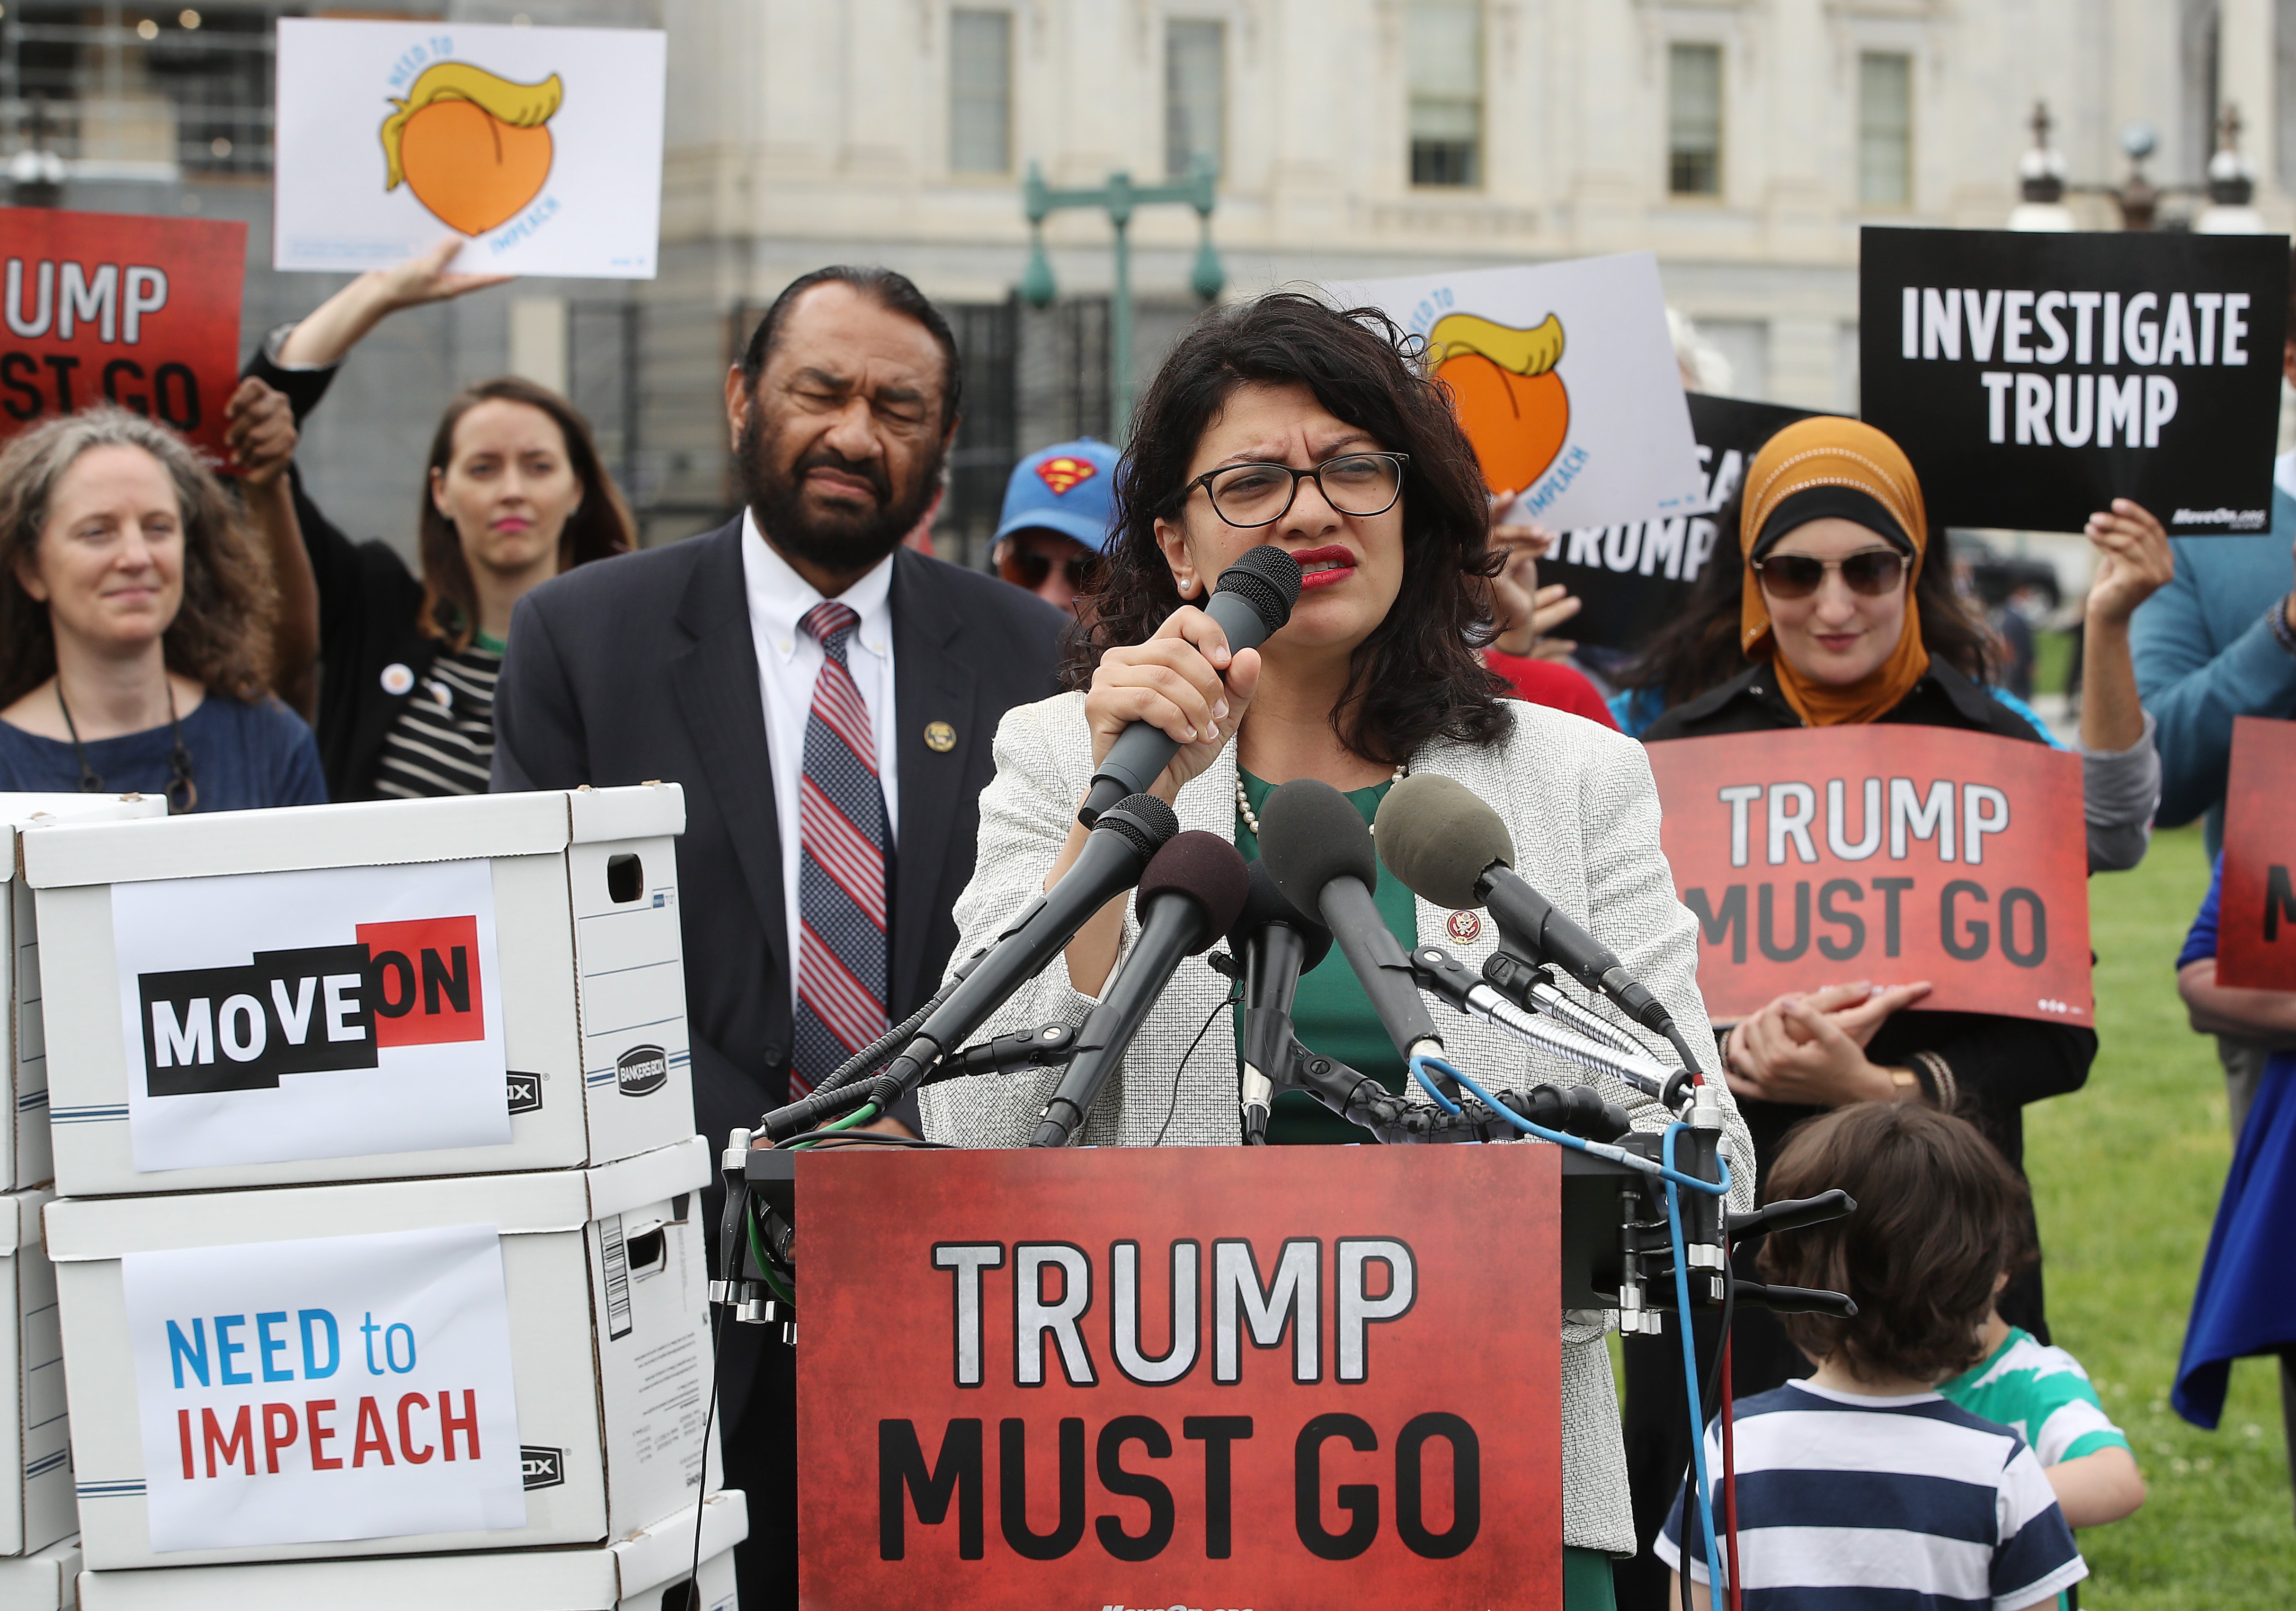 Rep. Rashida Tlaib (D-MI) speaks during an event with activist groups to deliver over ten million petition signatures to Congress urging the U.S. House of Representatives to start impeachment proceedings against President Donald Trump on Capitol Hill May 9, 2019 in Washington, DC. (Mark Wilson/Getty Images)